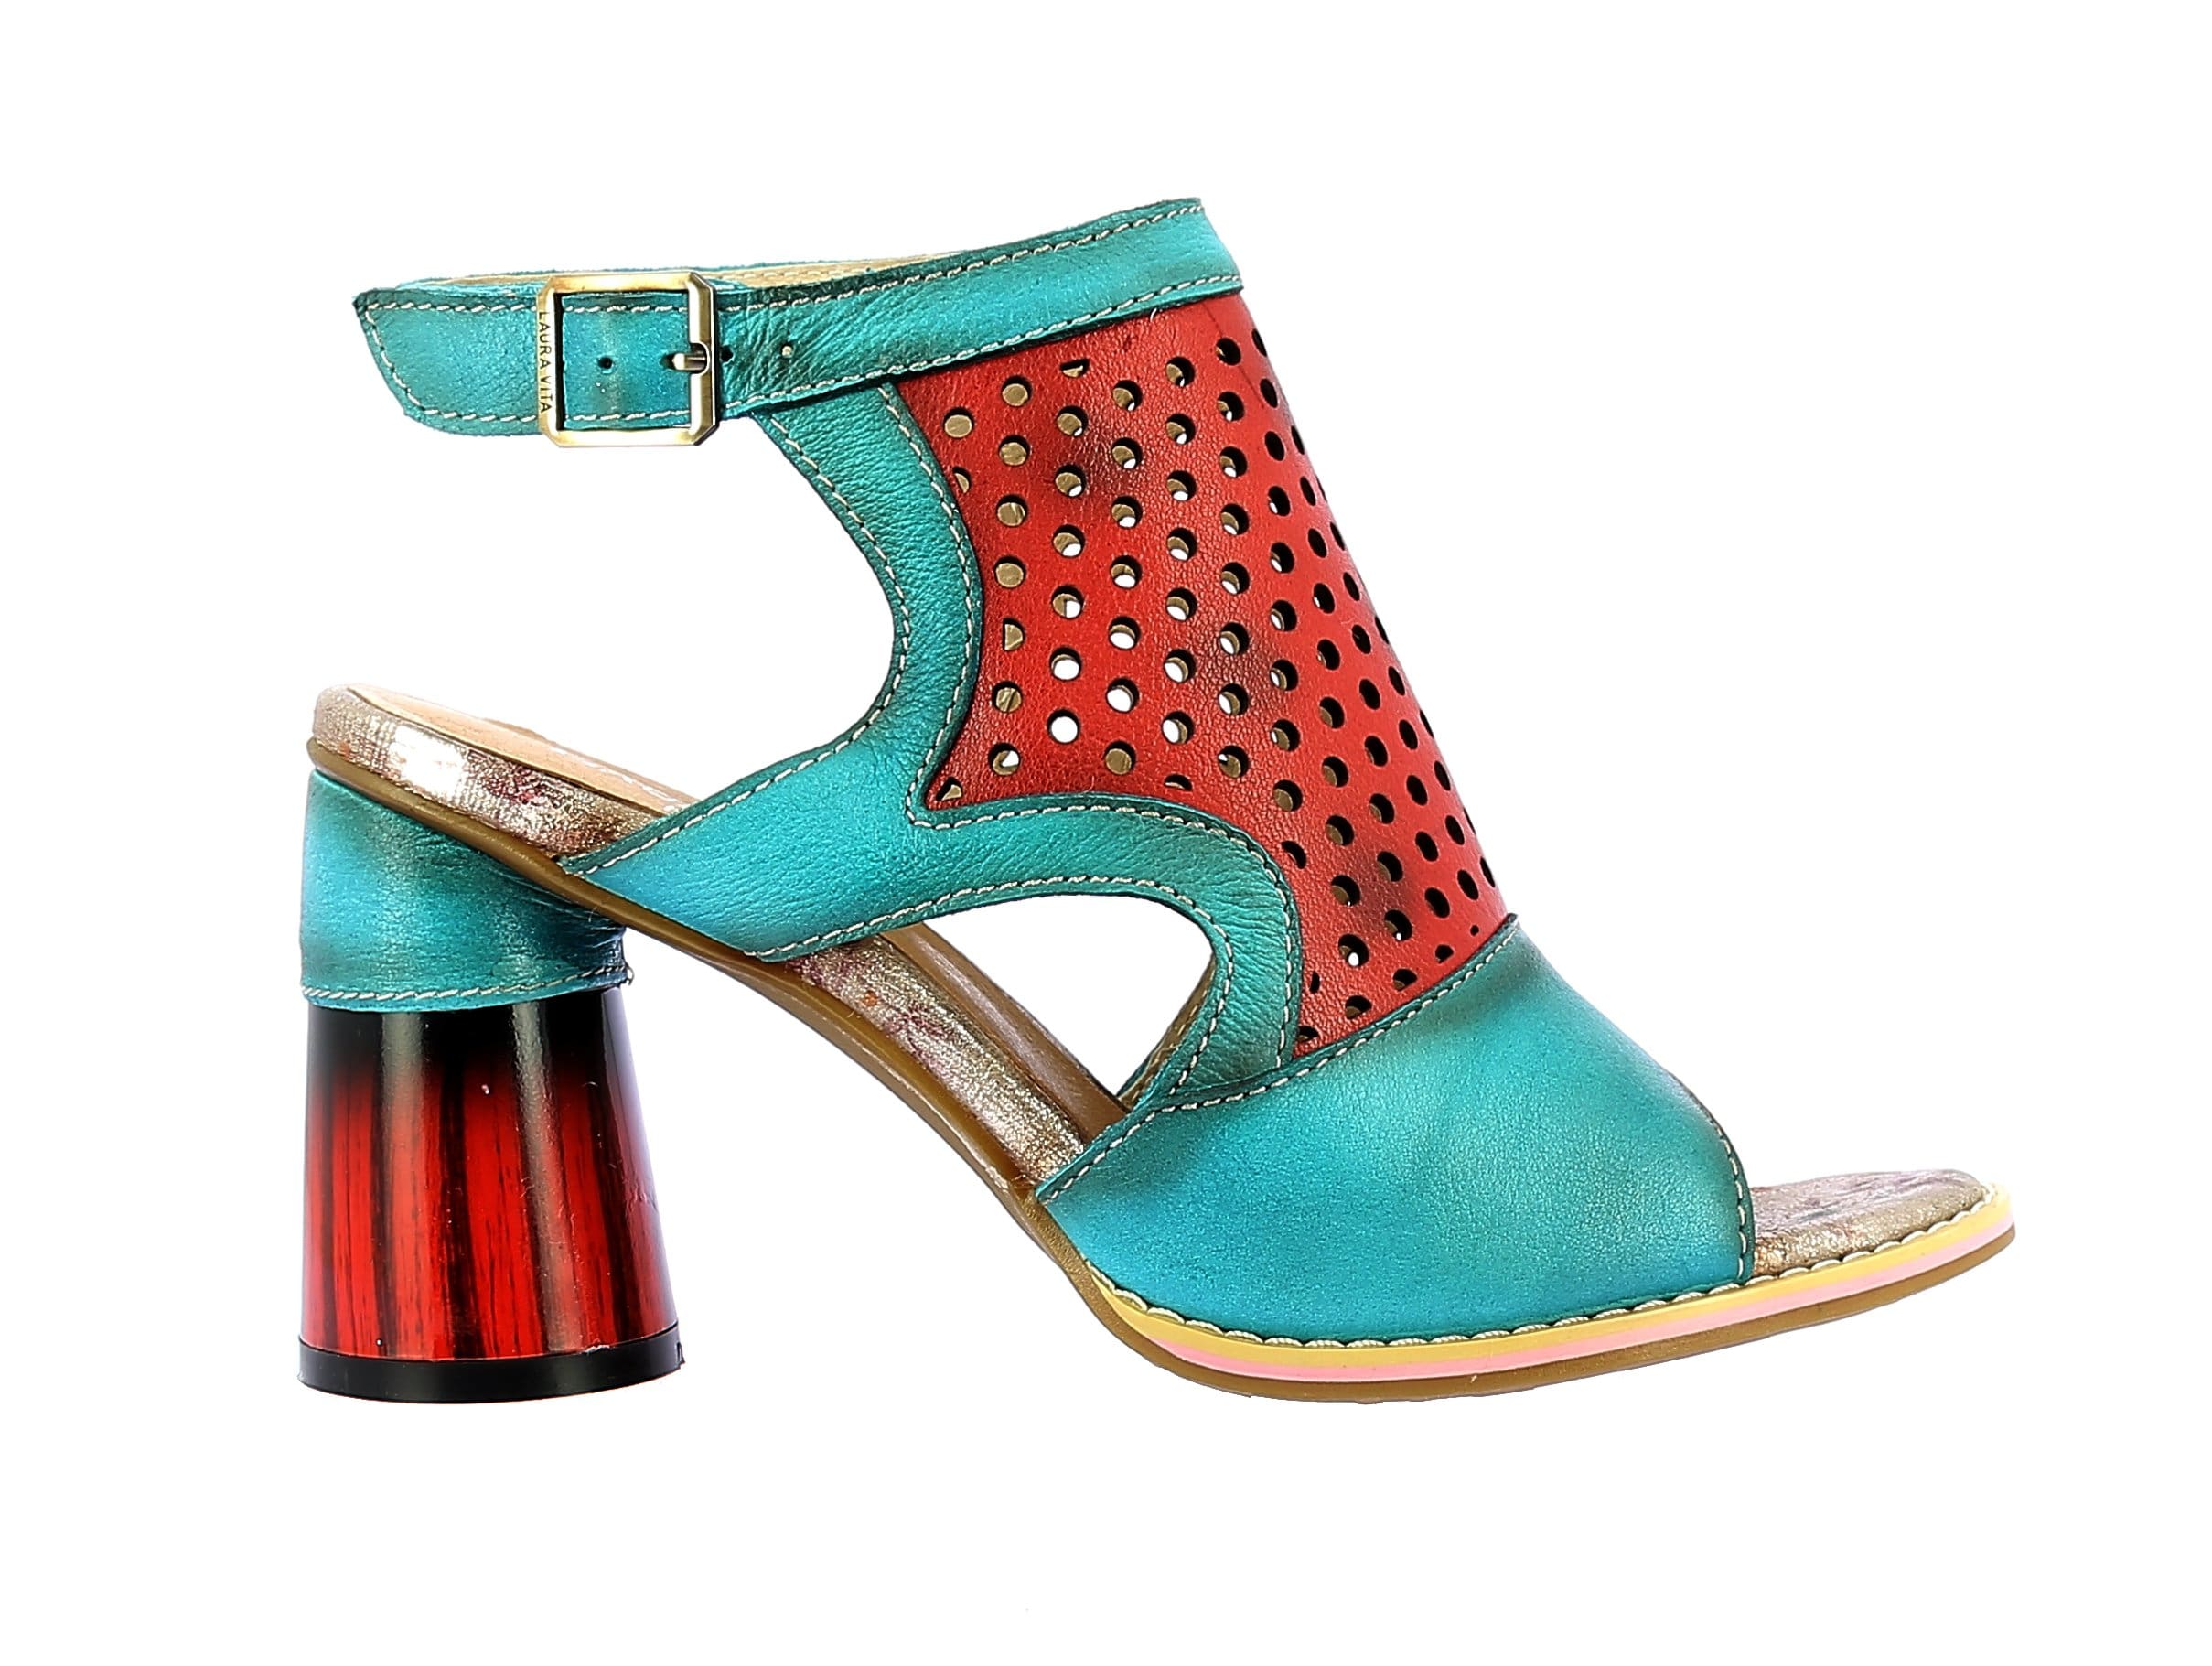 GUCSTOO 21 shoes - 35 / TURQUOISE - Sandal